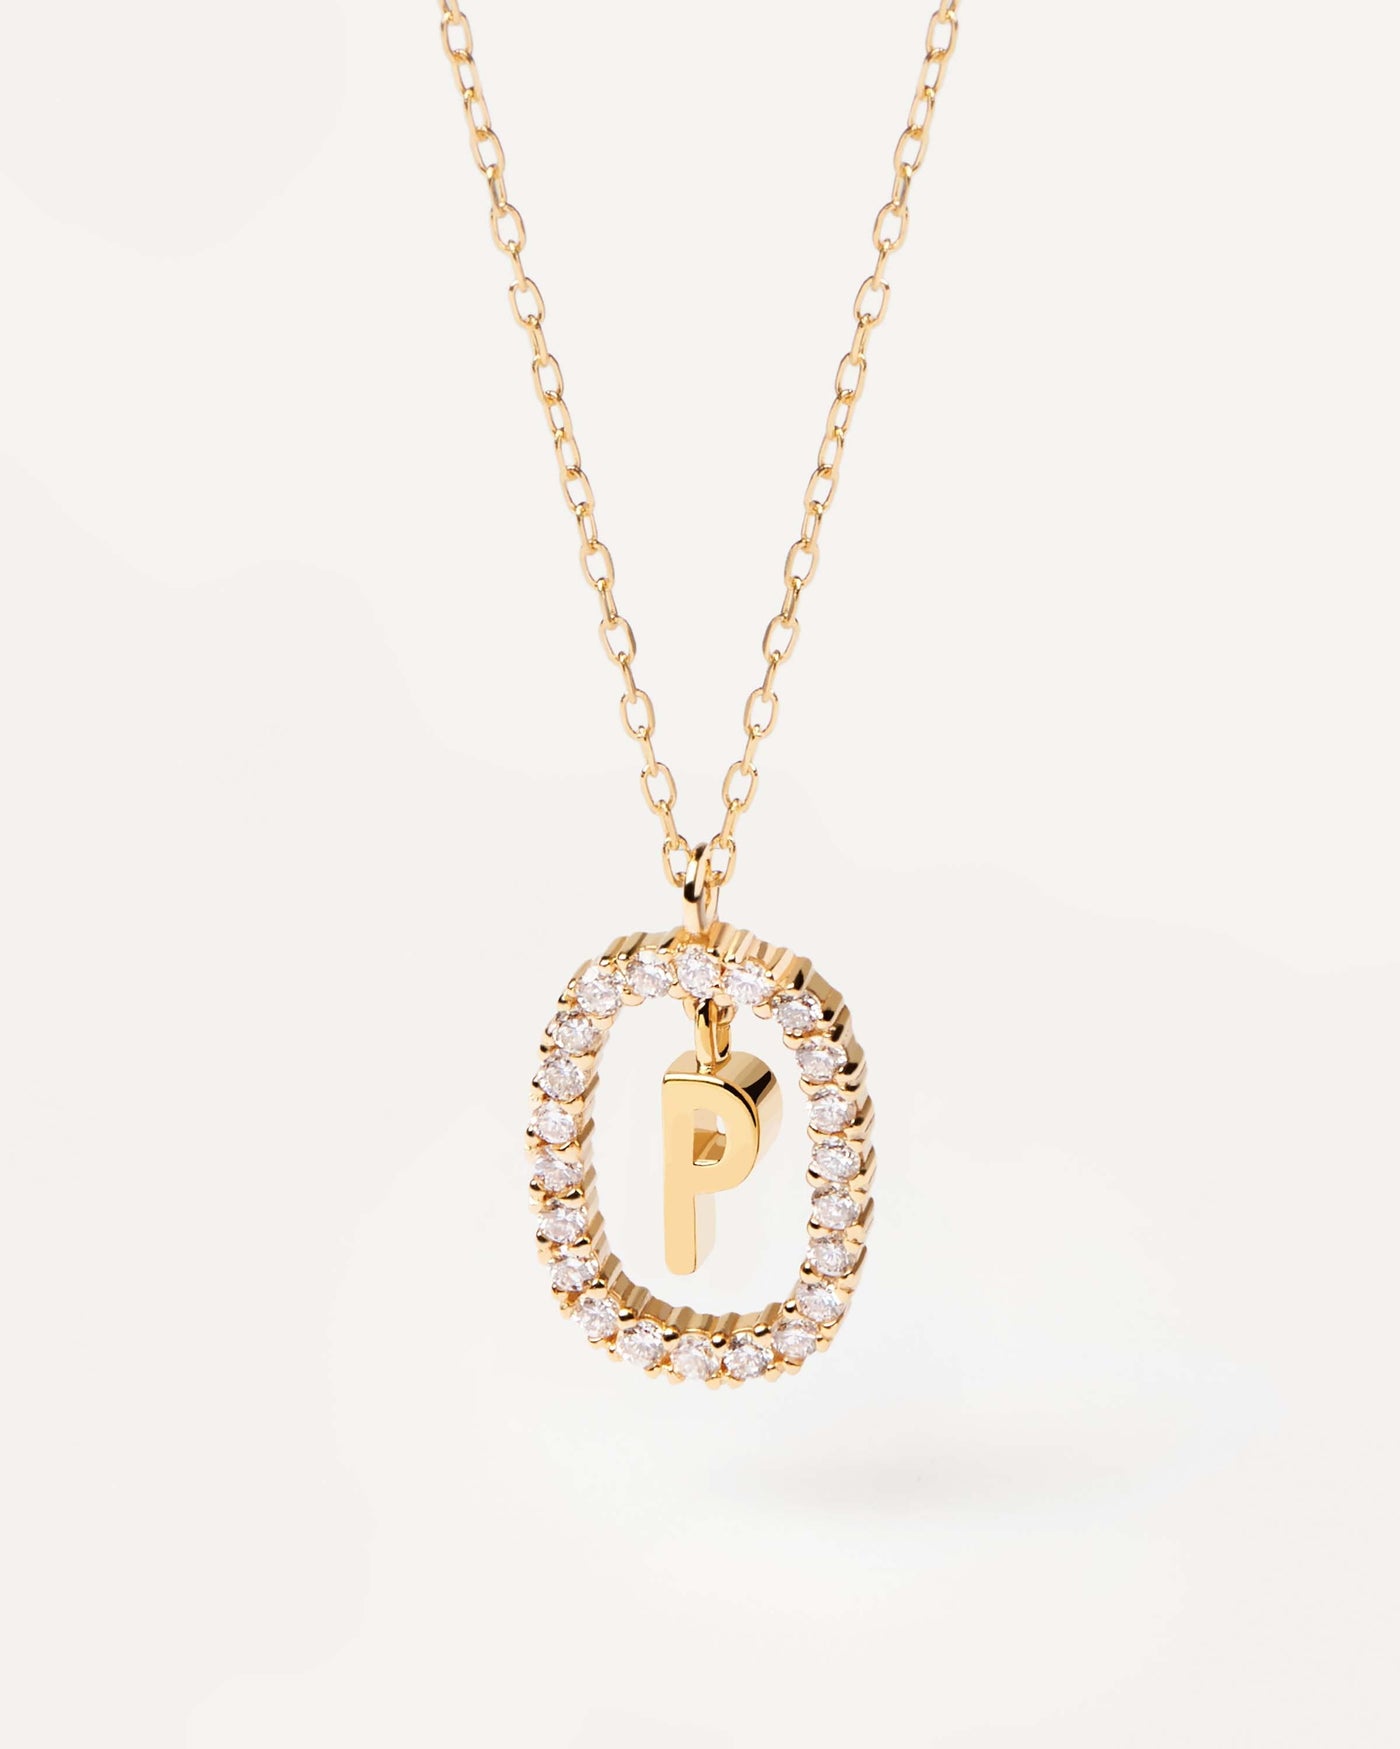 2023 Selection | Diamonds and Gold Letter P Necklace. Initial P necklace in solid yellow gold, circled by 0.33 carats lab-grown diamonds. Get the latest arrival from PDPAOLA. Place your order safely and get this Best Seller. Free Shipping.